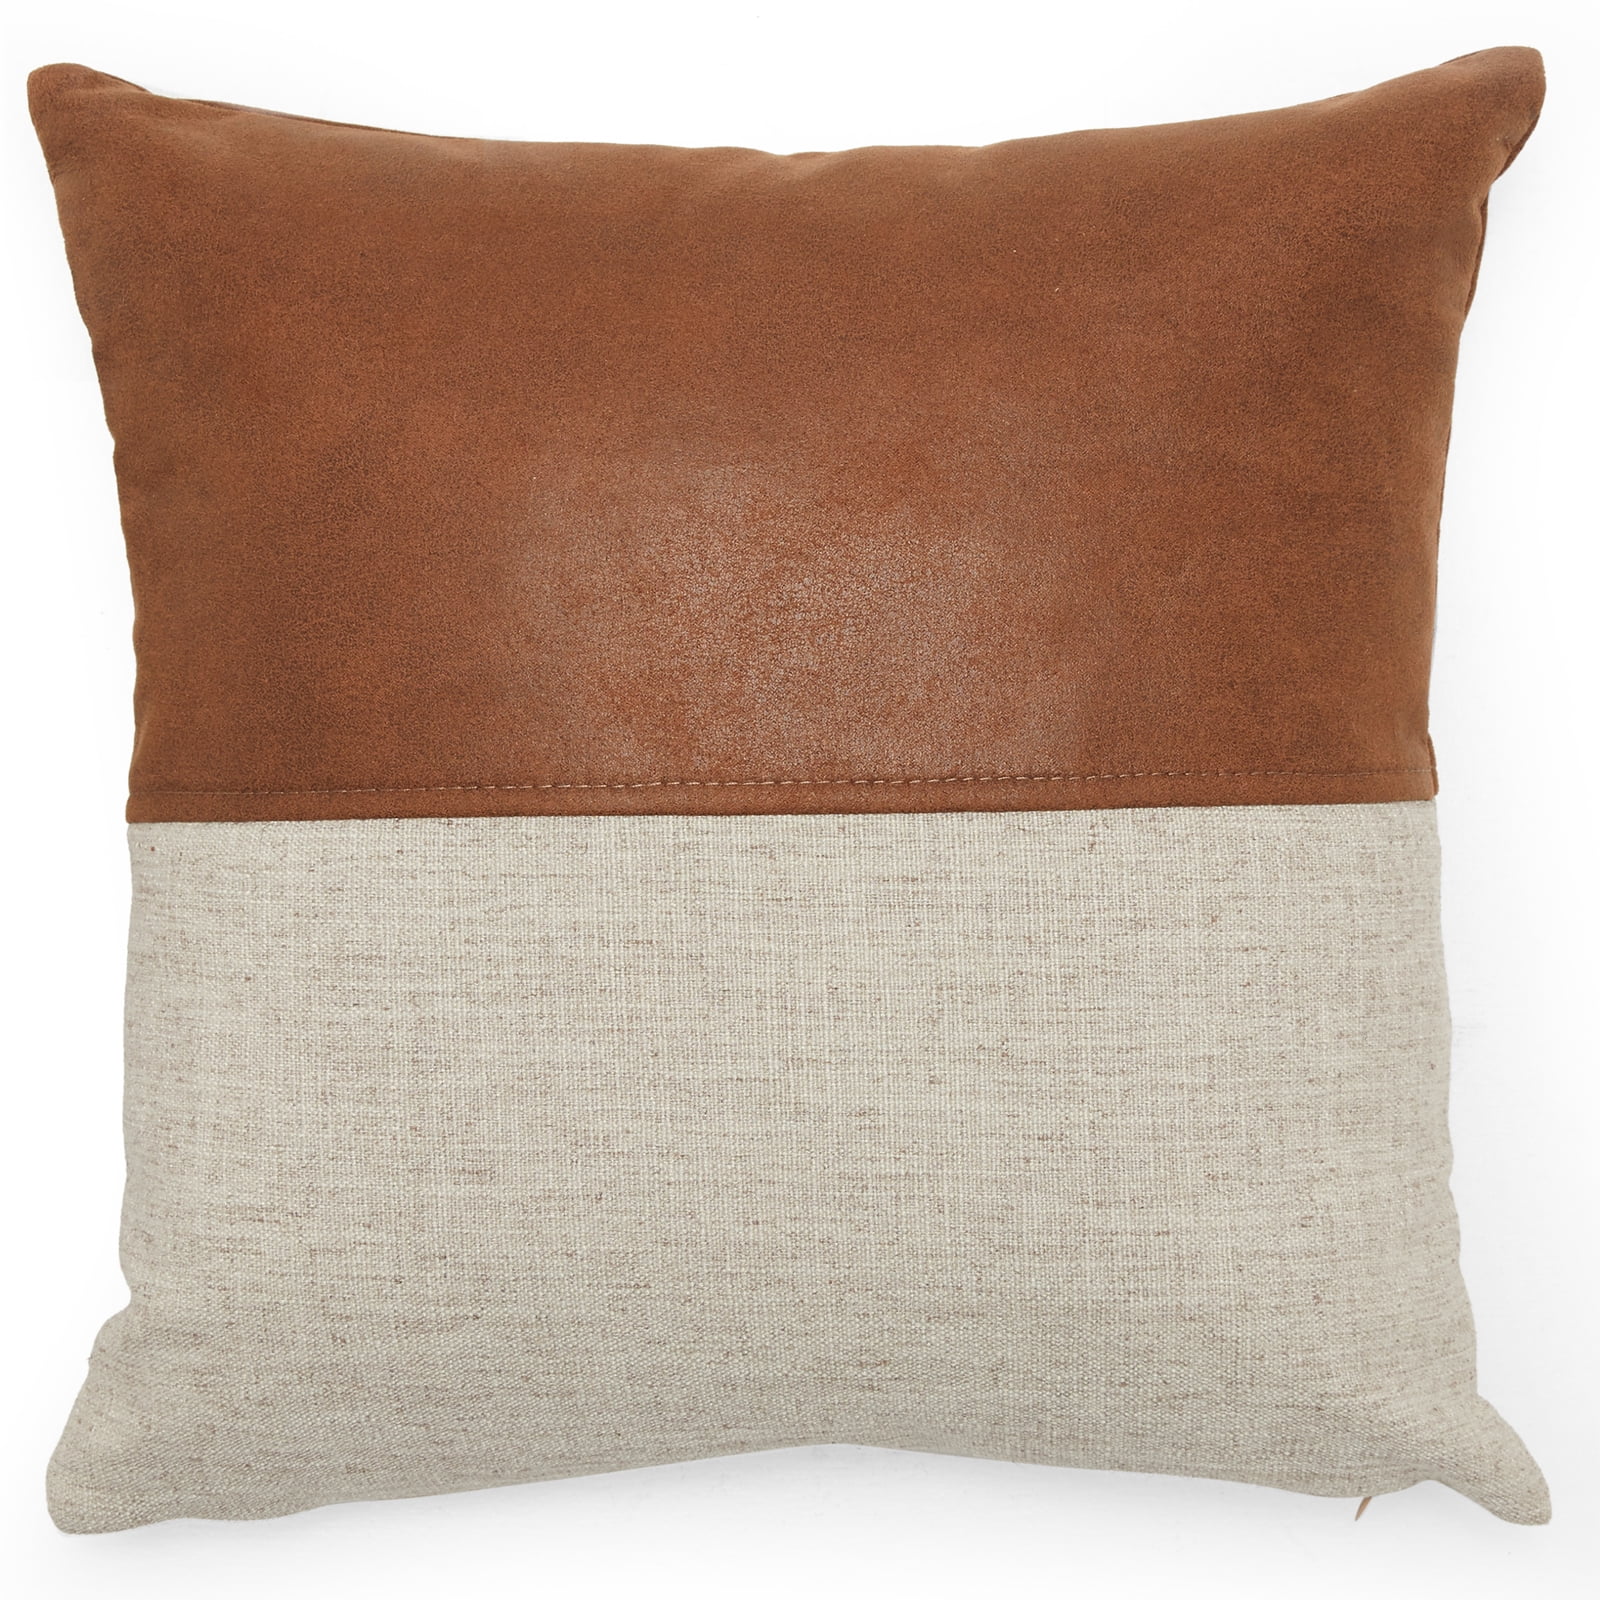 Modrn Industrial Mixed Material, Faux Leather Pillow